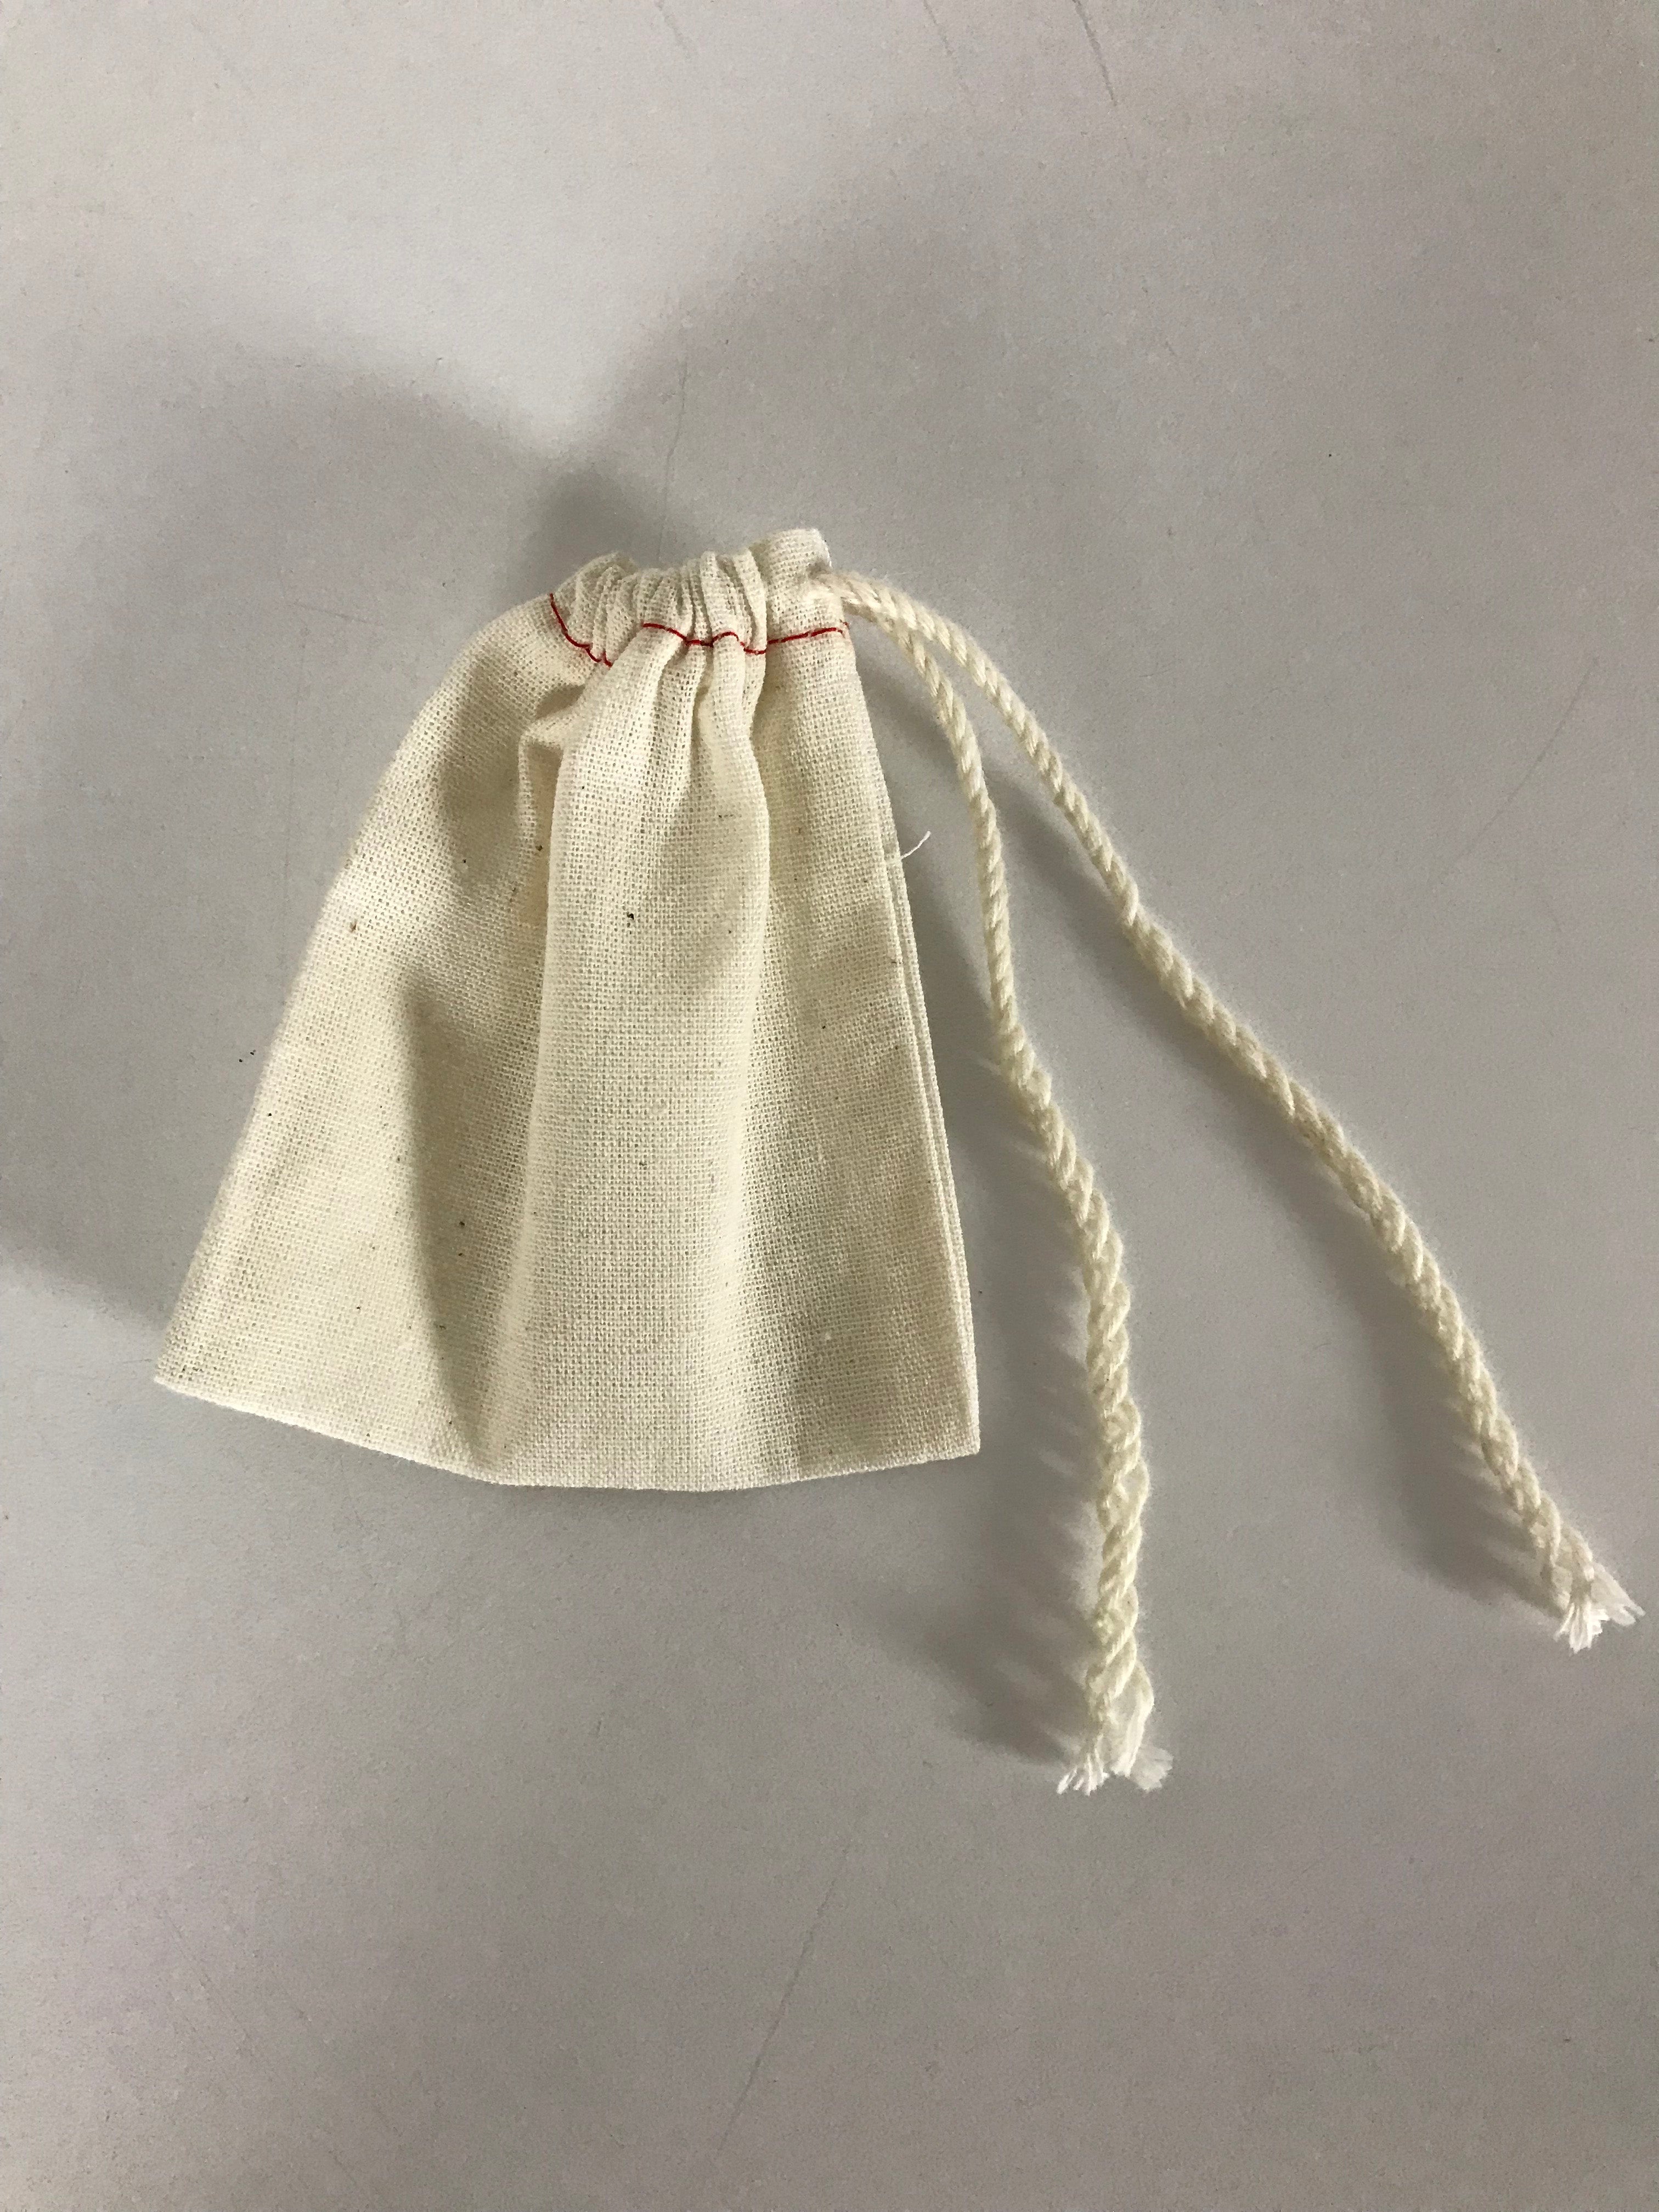 Lot of 29 Cloth Drawstring Jewelry Bags